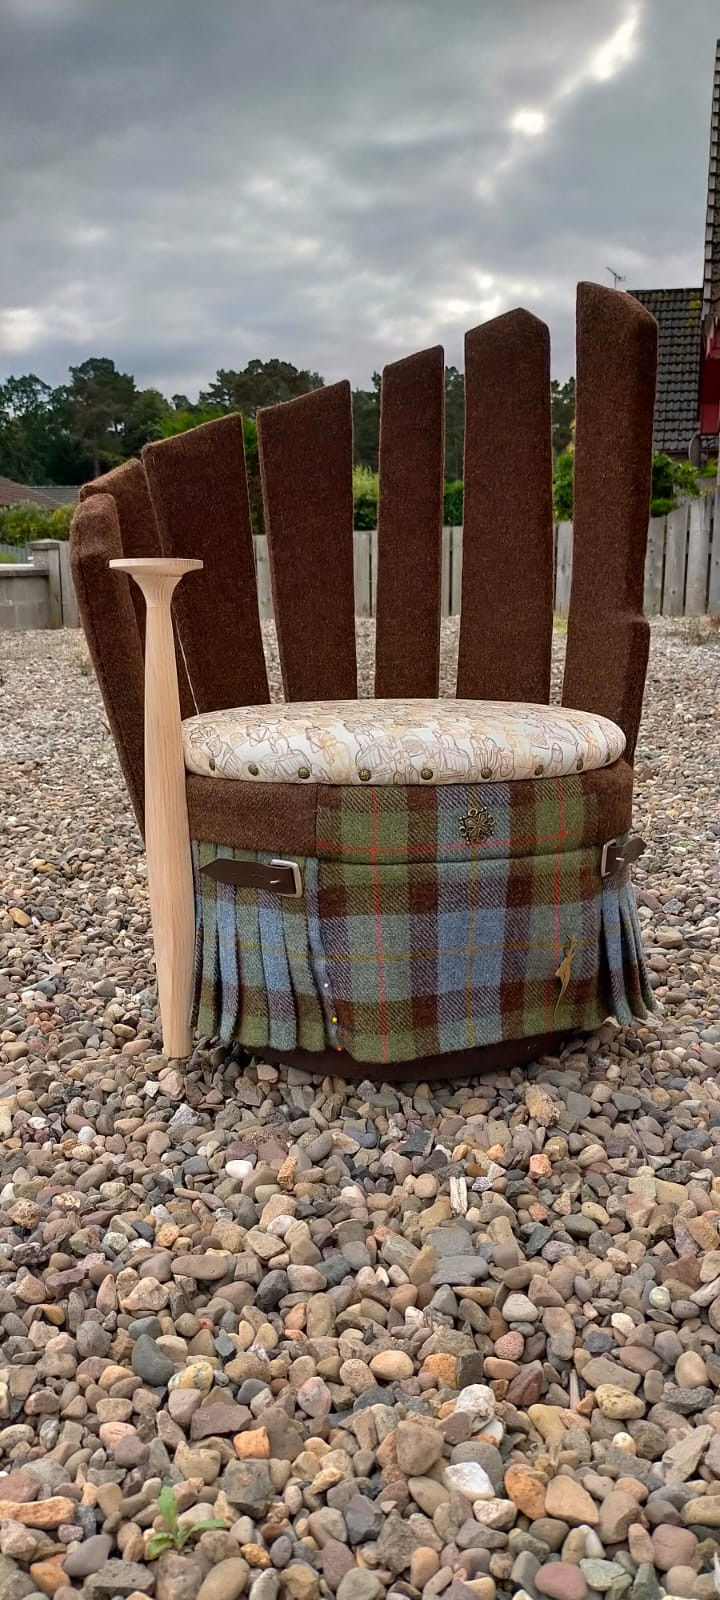 A chair with large fabric staves, a cushion with imprints of the Lewis Chessman in shades of orange and brown, and a base covered with Harris Tweed.